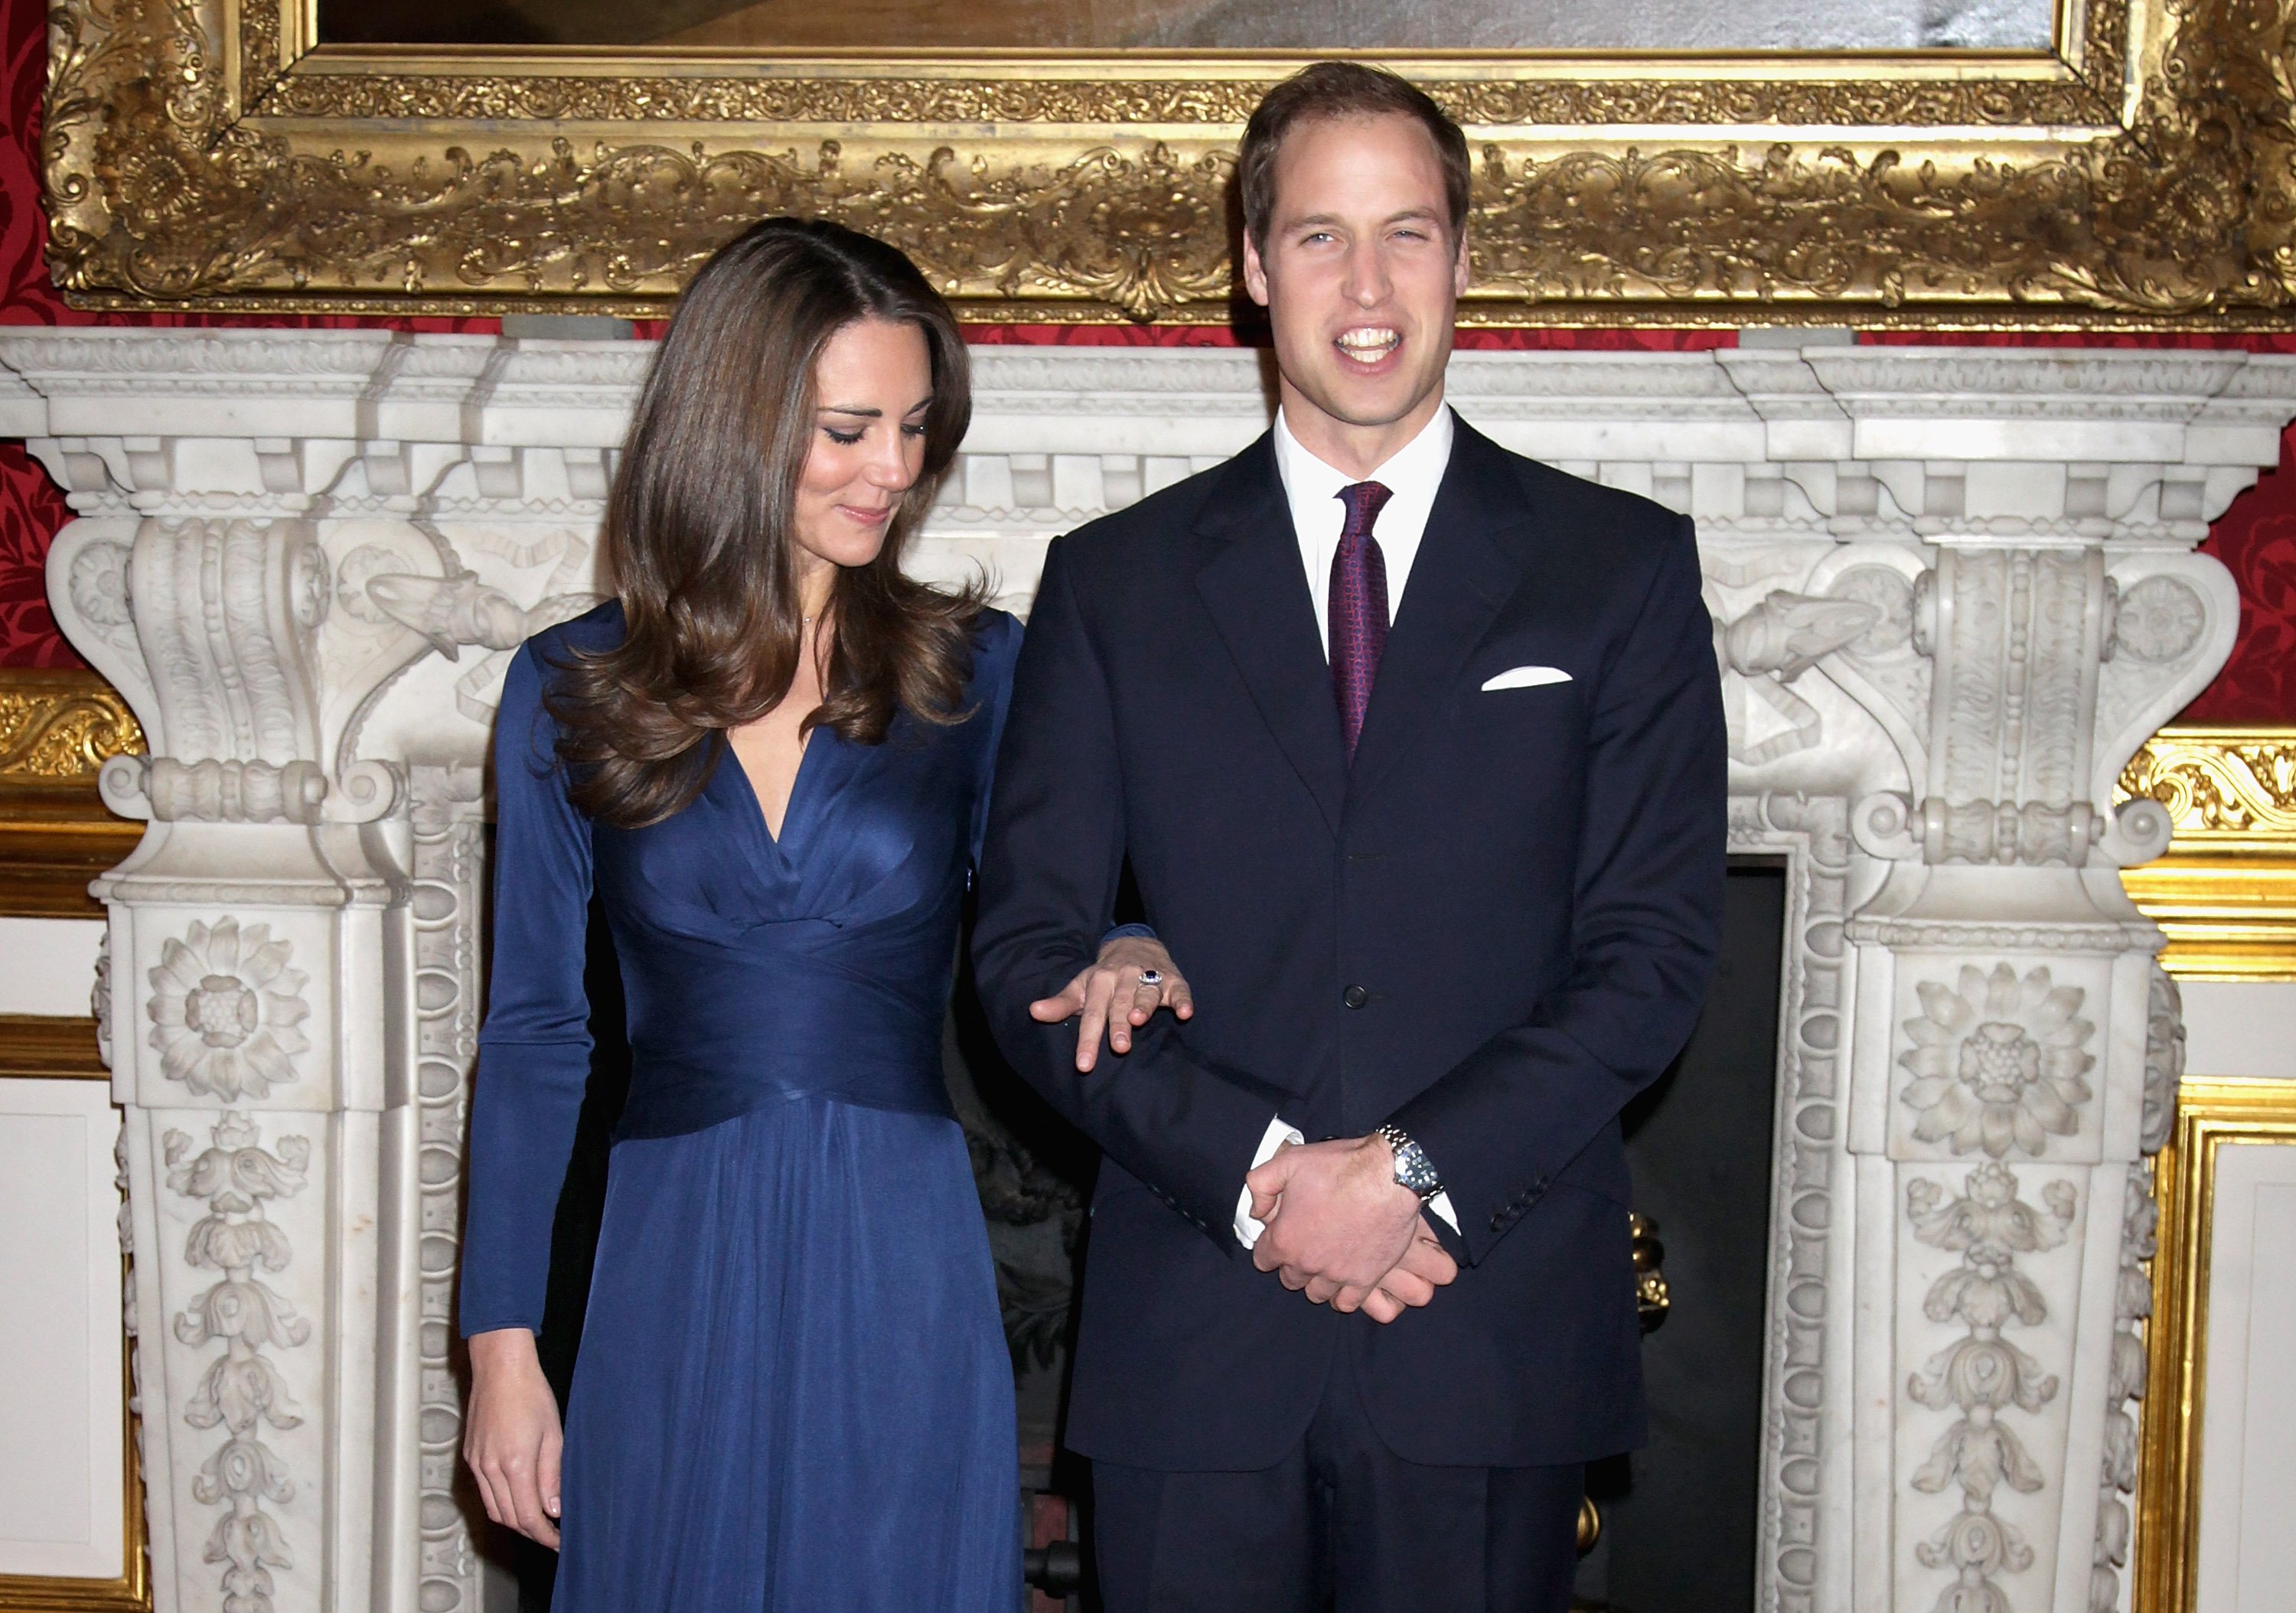  Prince William and Kate Middleton arrive to pose for photographs in the State Apartments of St James Palace on November 16, 2010 in London, England | Source: Getty Images